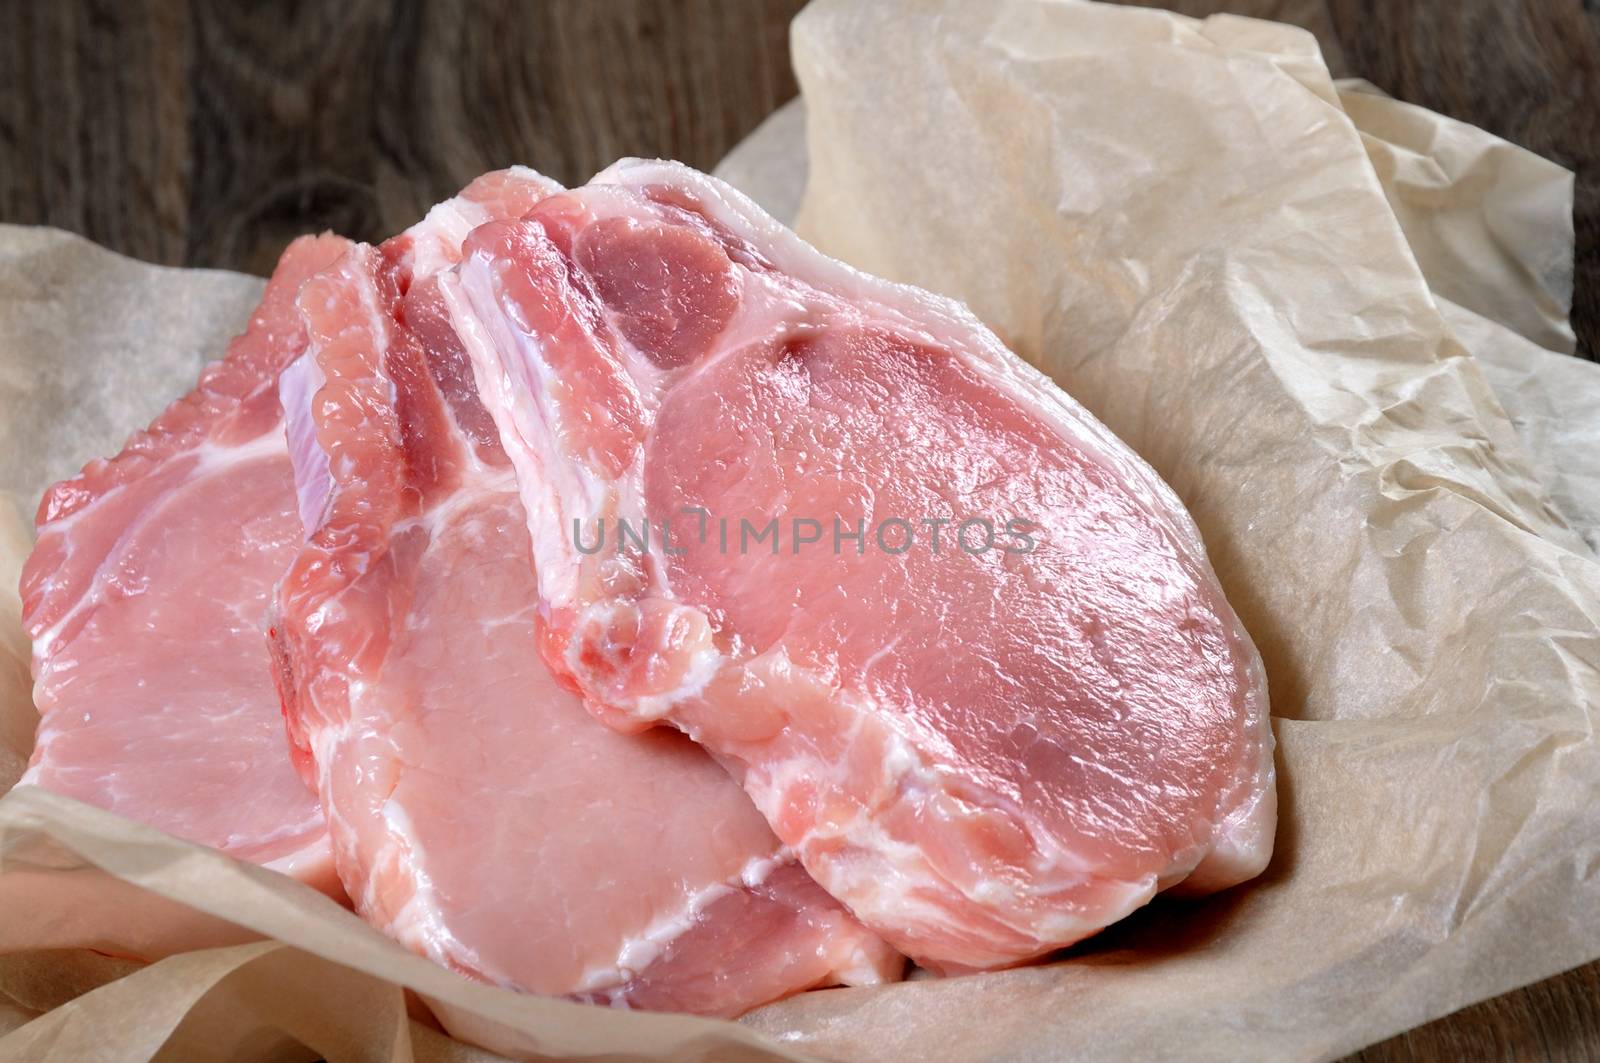 A pile of fresh chopped raw pork steaks over the bones in the wrapping paper on the table. Close-up.